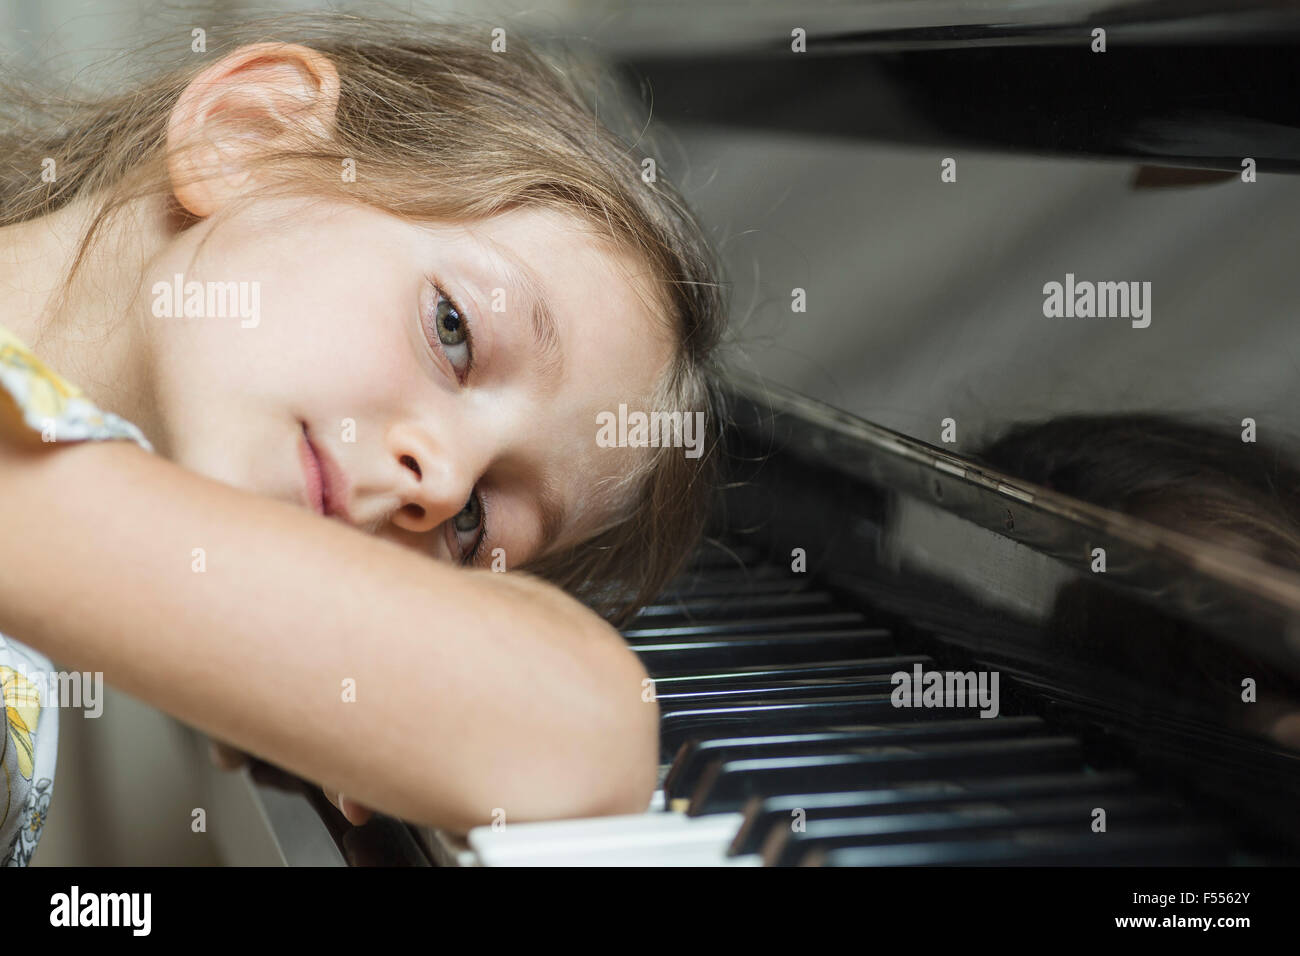 Portrait of Girl leaning on piano Banque D'Images